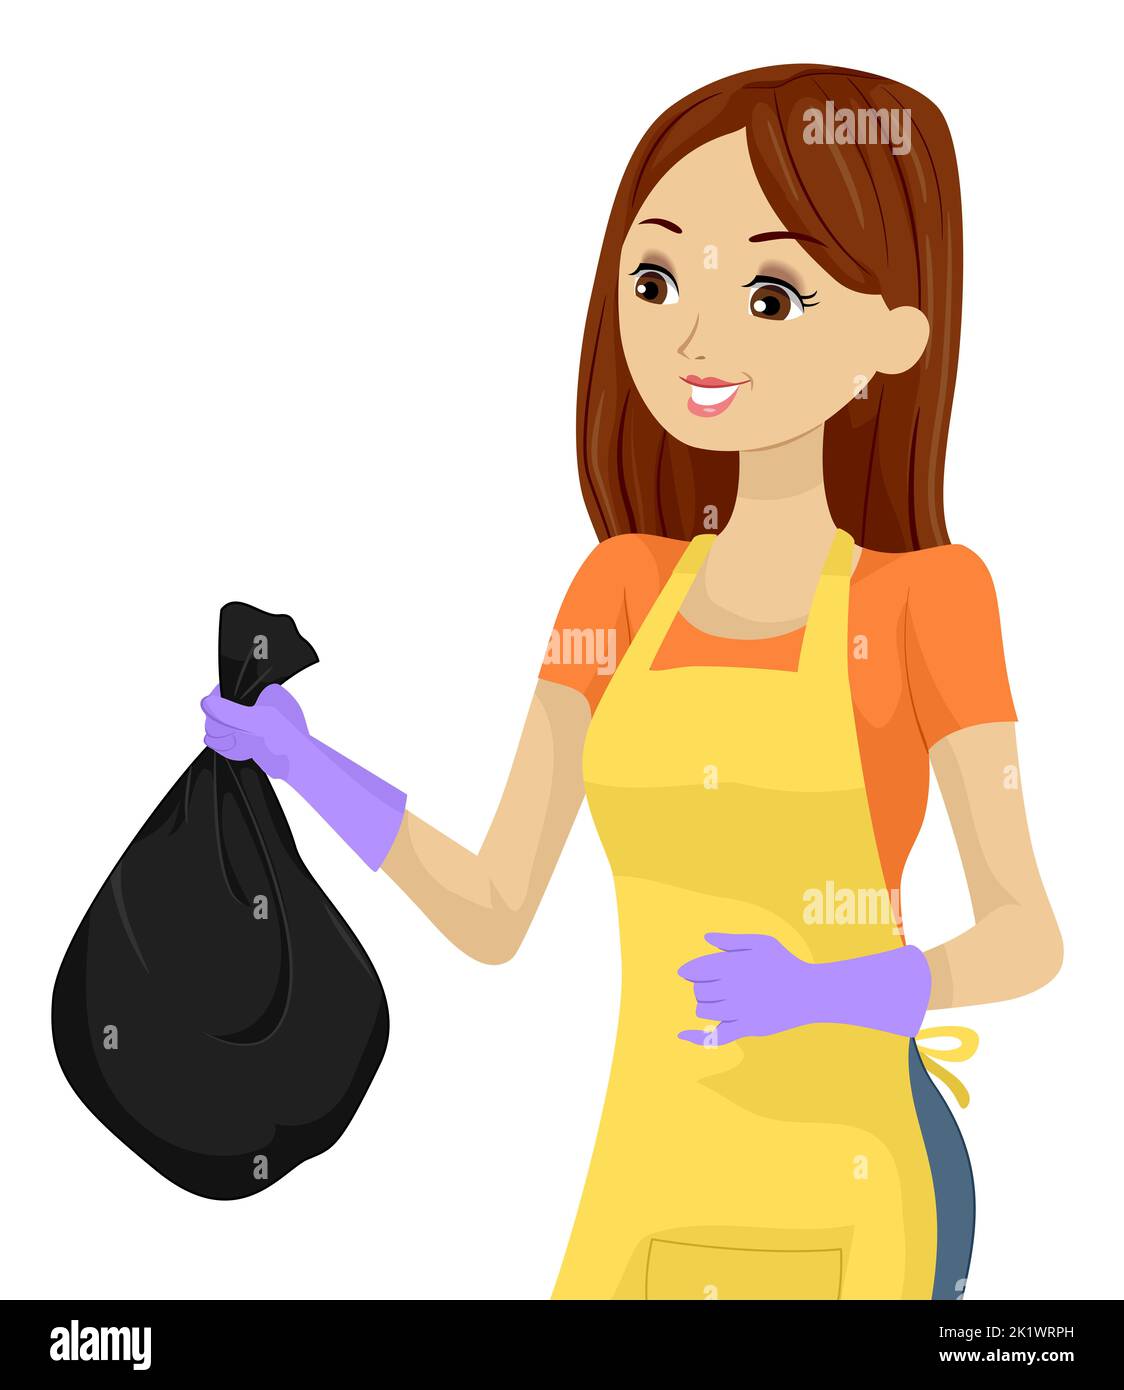 Illustration of Teen Girl Wearing Apron and Rubber Gloves Disposing Garbage in a Black Plastic Bag Stock Photo